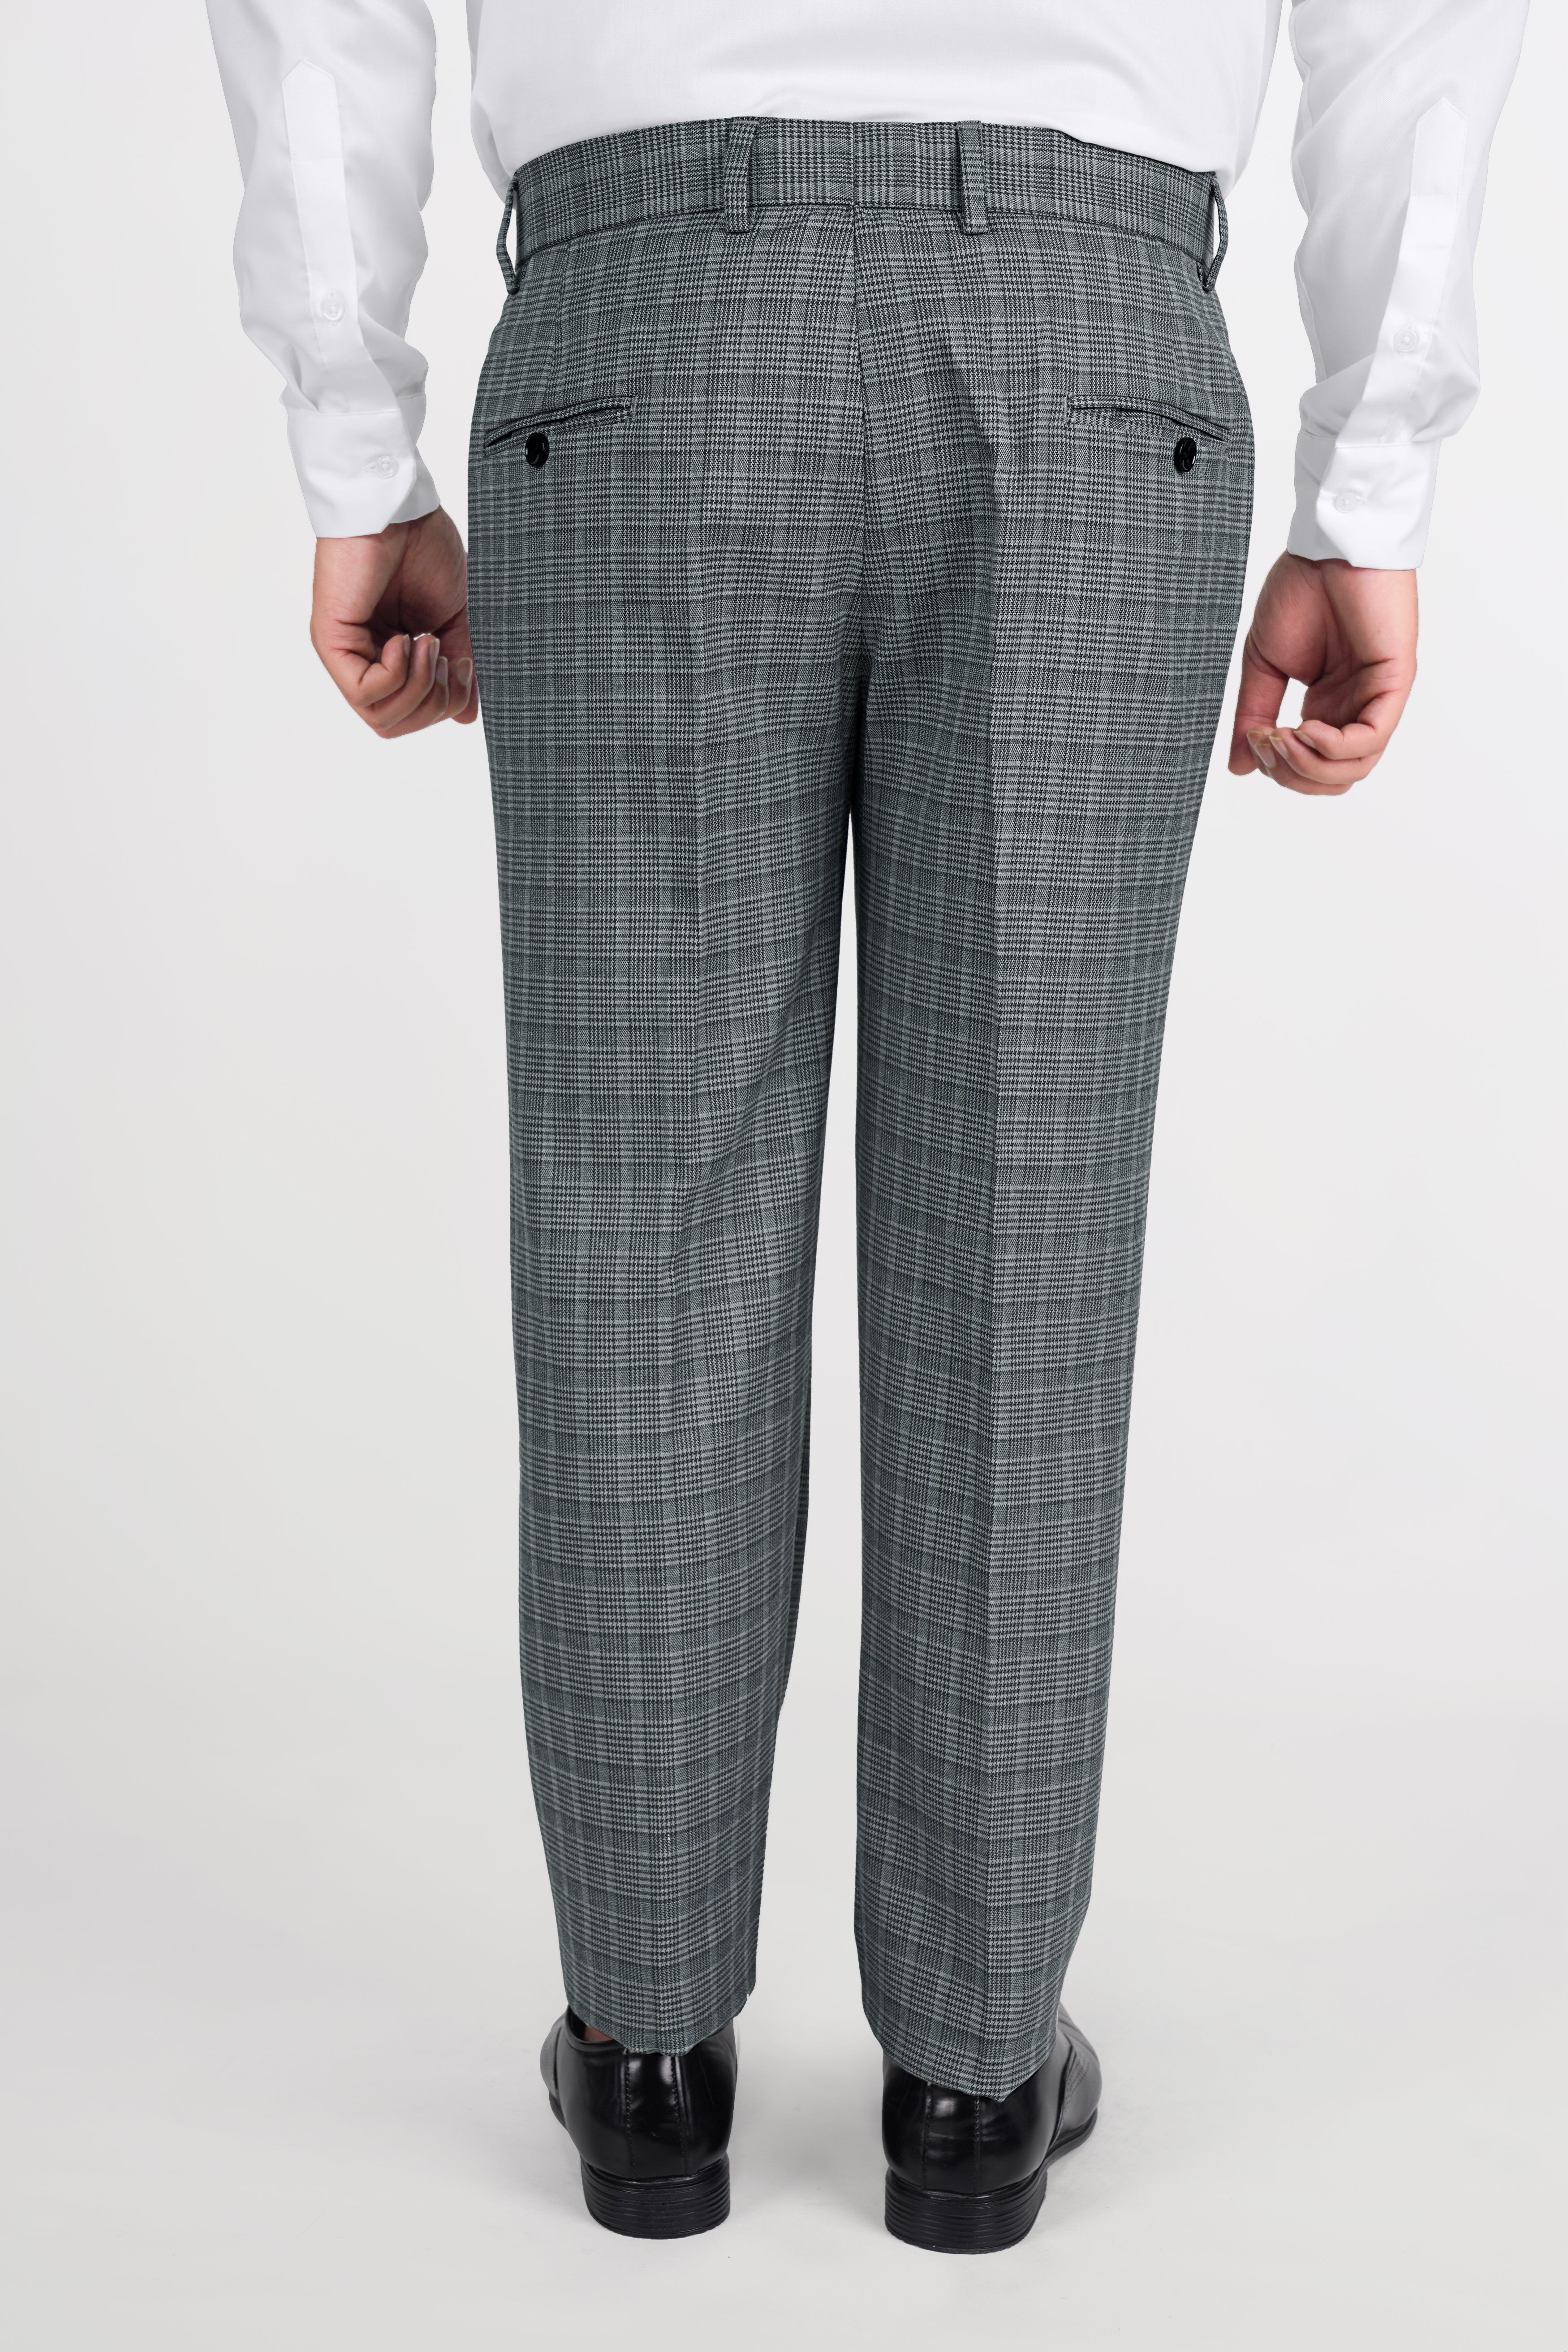 Oslo Gray Checkered Wool Rich Bandhgala Designer Stretchable traveler Suit ST2801-D38-36, ST2801-D38-38, ST2801-D38-40, ST2801-D38-42, ST2801-D38-44, ST2801-D38-46, ST2801-D38-48, ST2801-D38-50, ST2801-D38-52, ST2801-D38-54, ST2801-D38-56, ST2801-D38-58, ST2801-D38-60